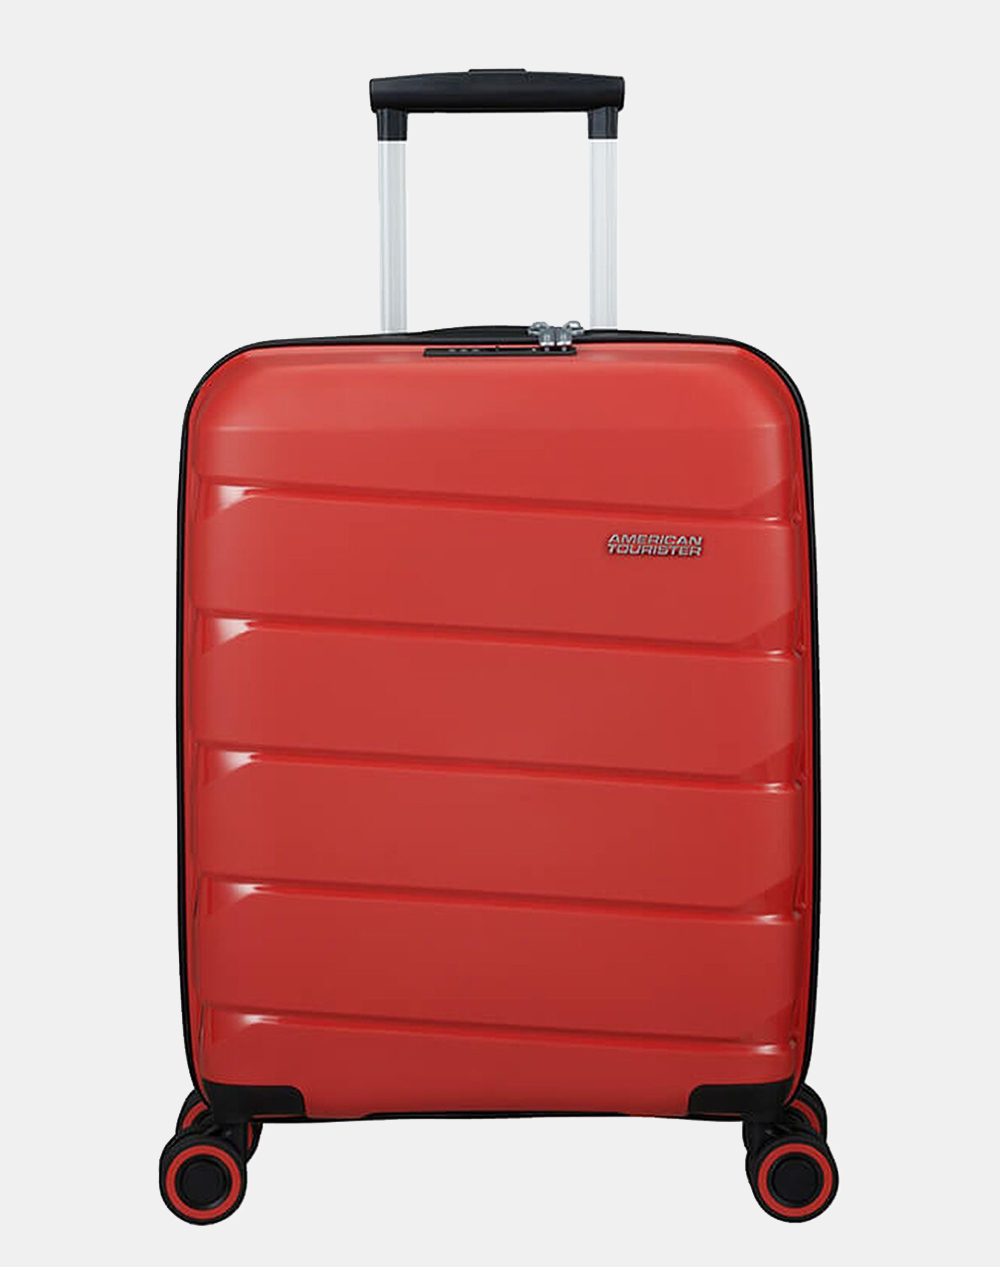 American Tourister Hello Cabin 55cm Cabin Suitcase at Luggage Superstore